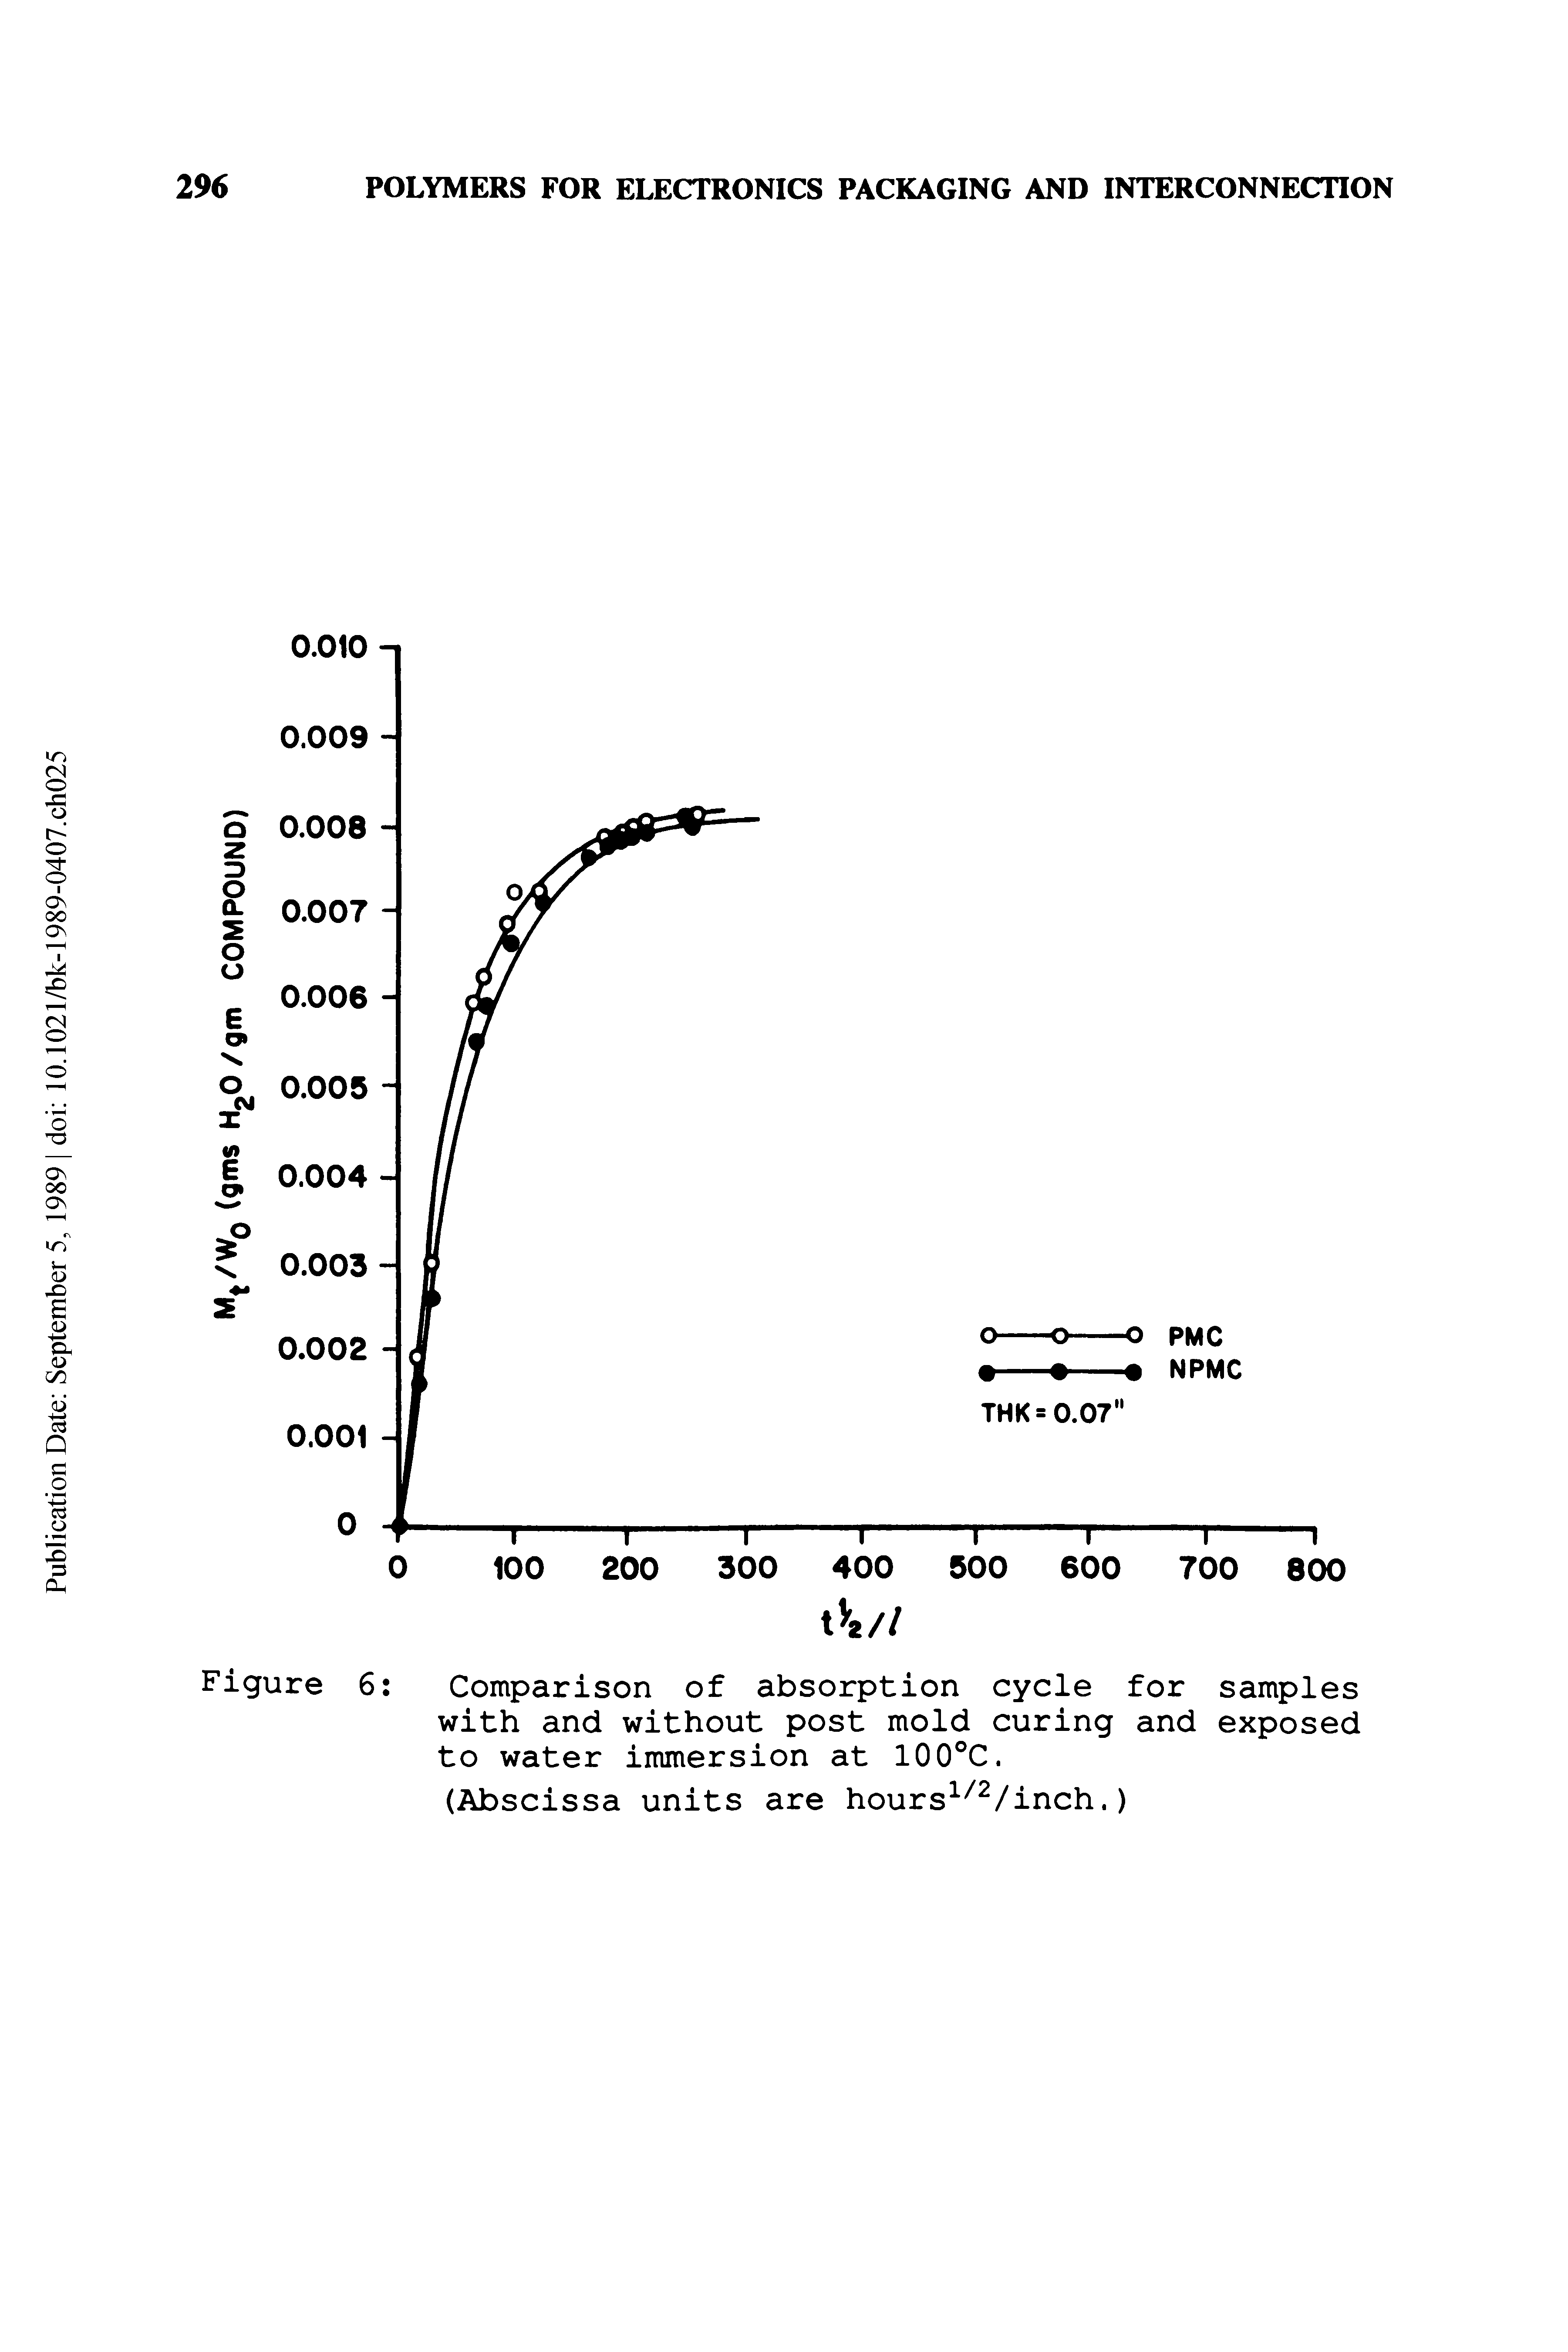 Figure 6 Comparison of absorption cycle for samples with and without post mold curing and exposed to water immersion at 100°C.